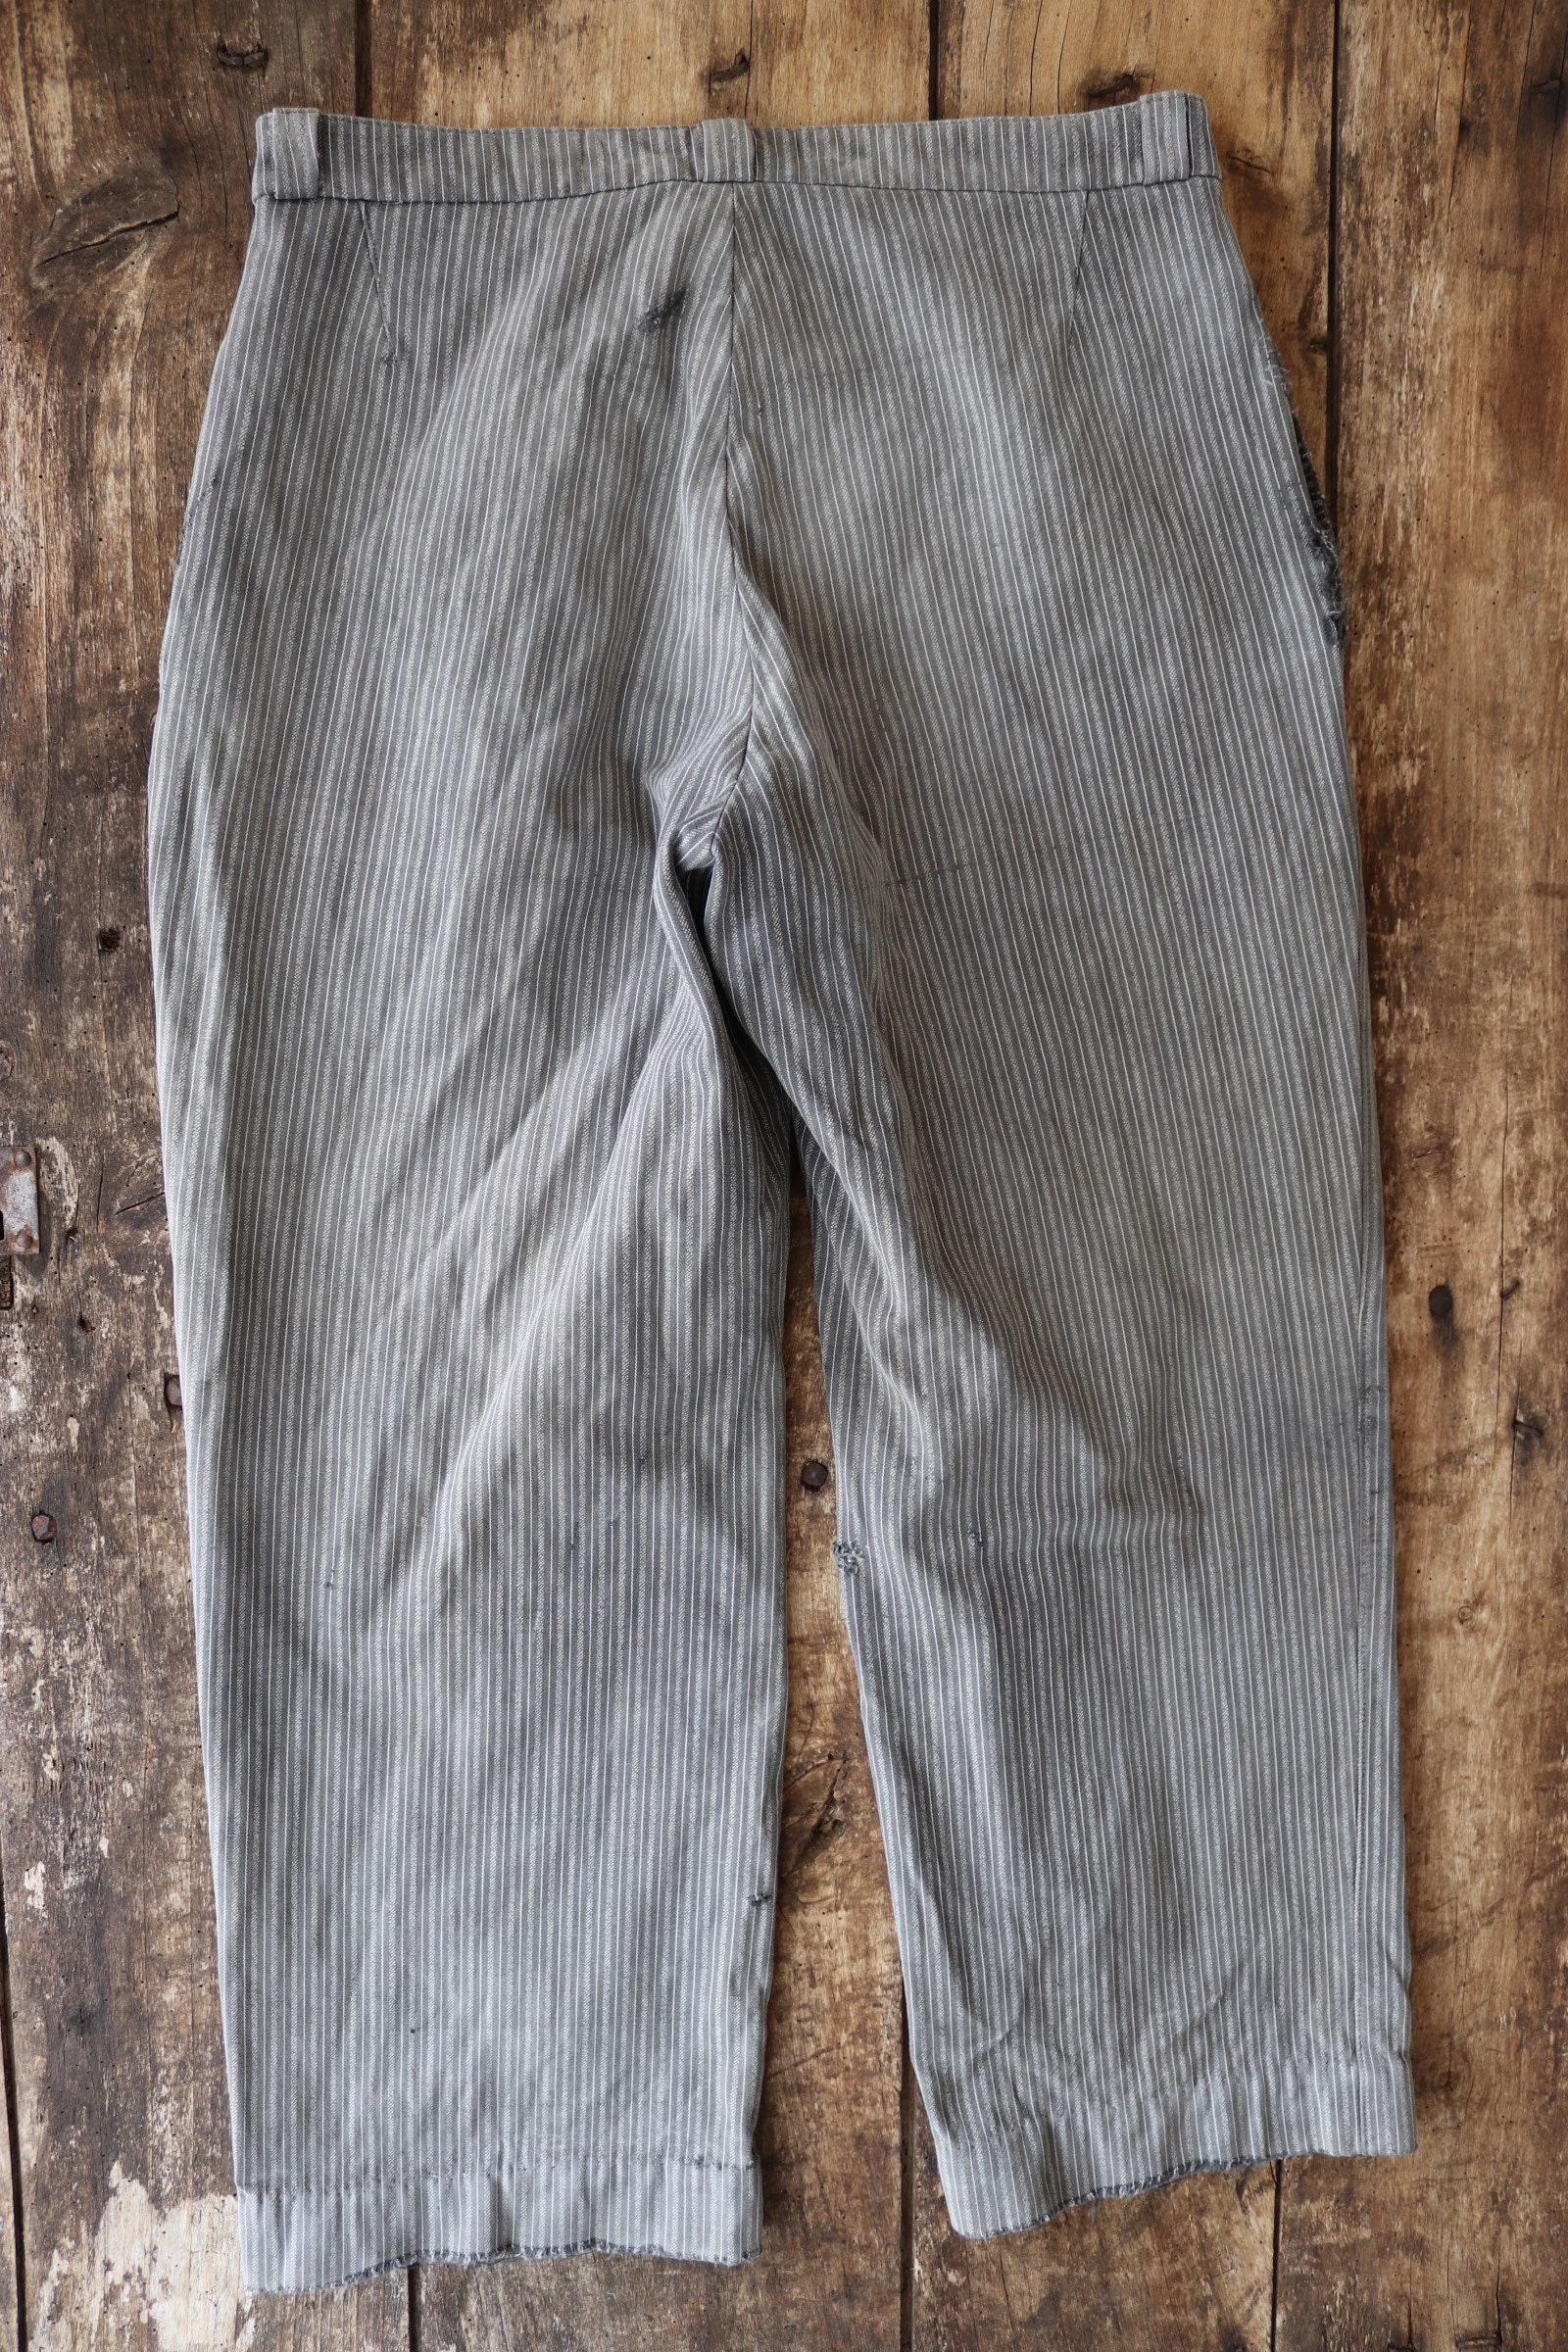 Vintage 1950s 50s french grey striped trousers pants button fly darned ...